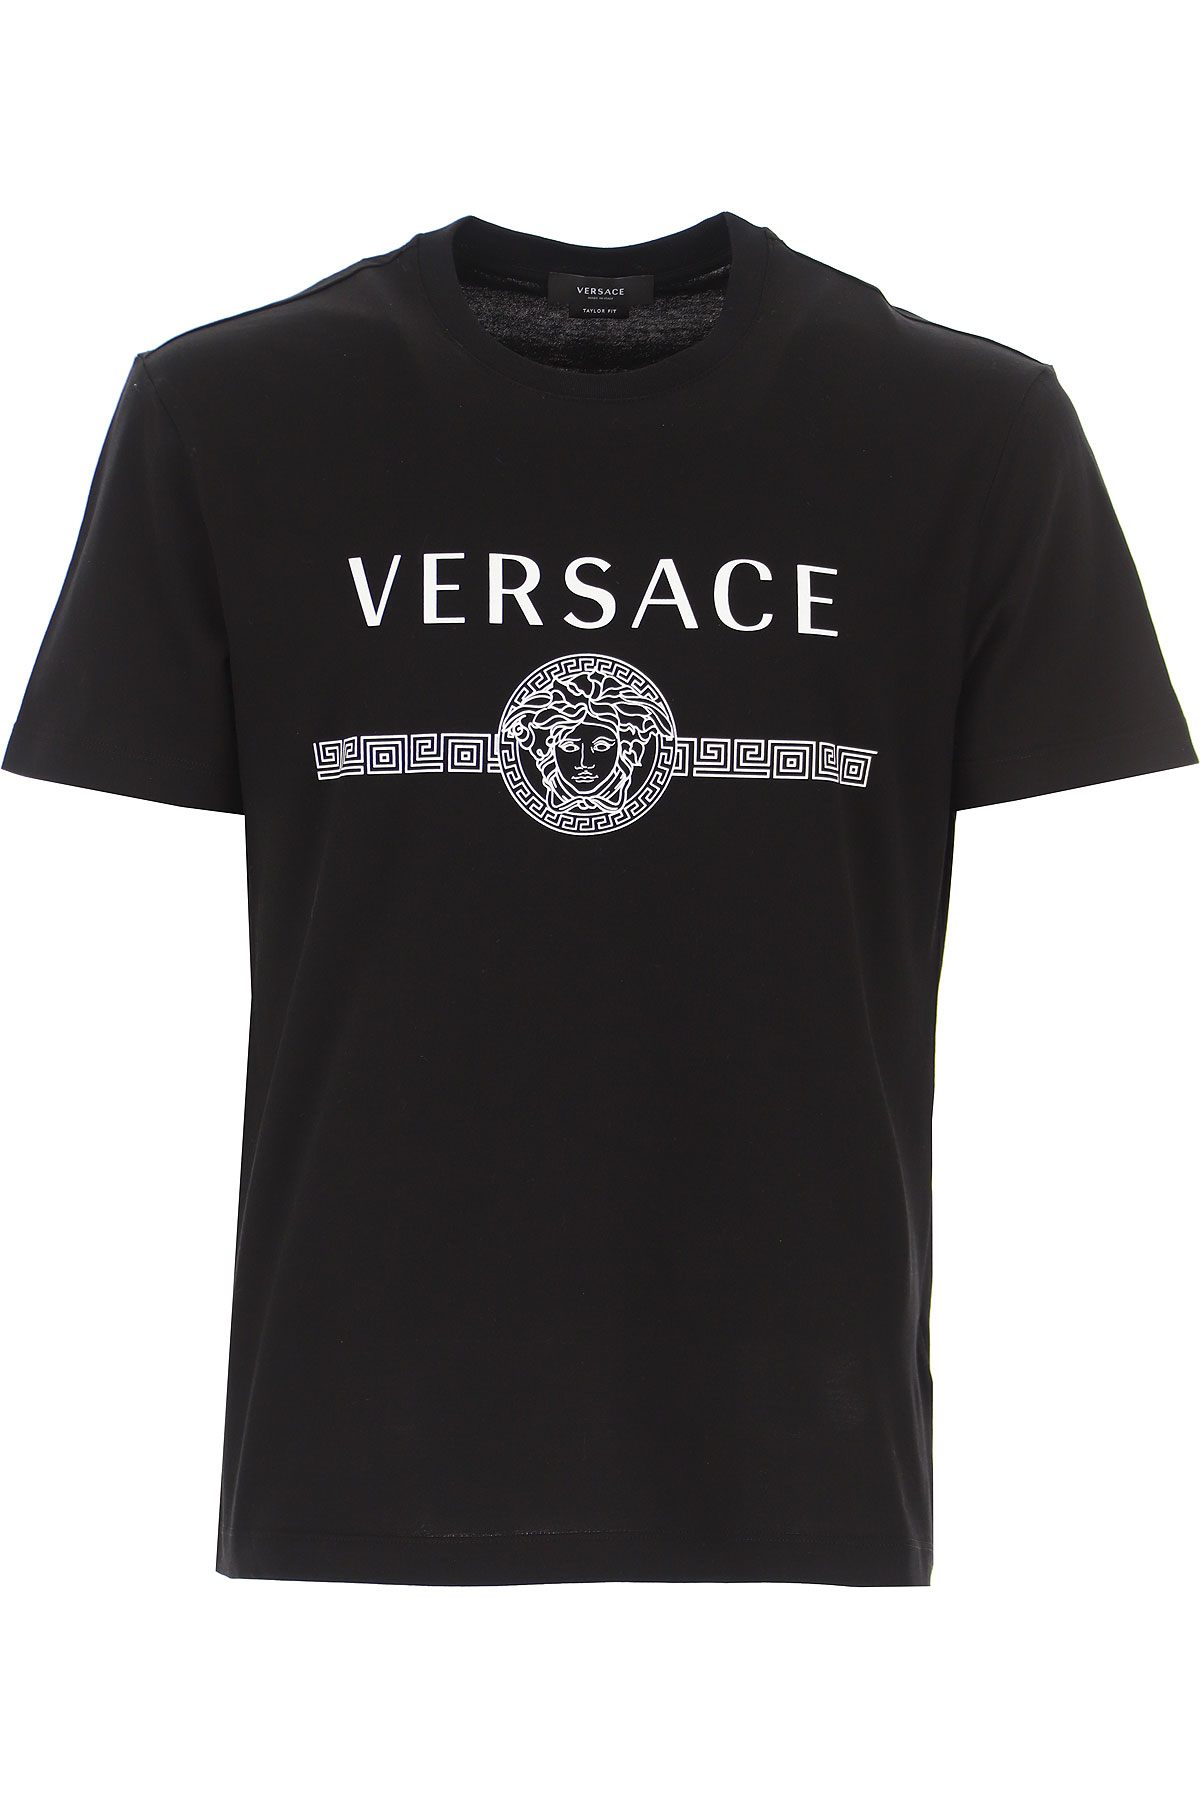 Mens Clothing Versace, Style code: a87573-a228806-a1008